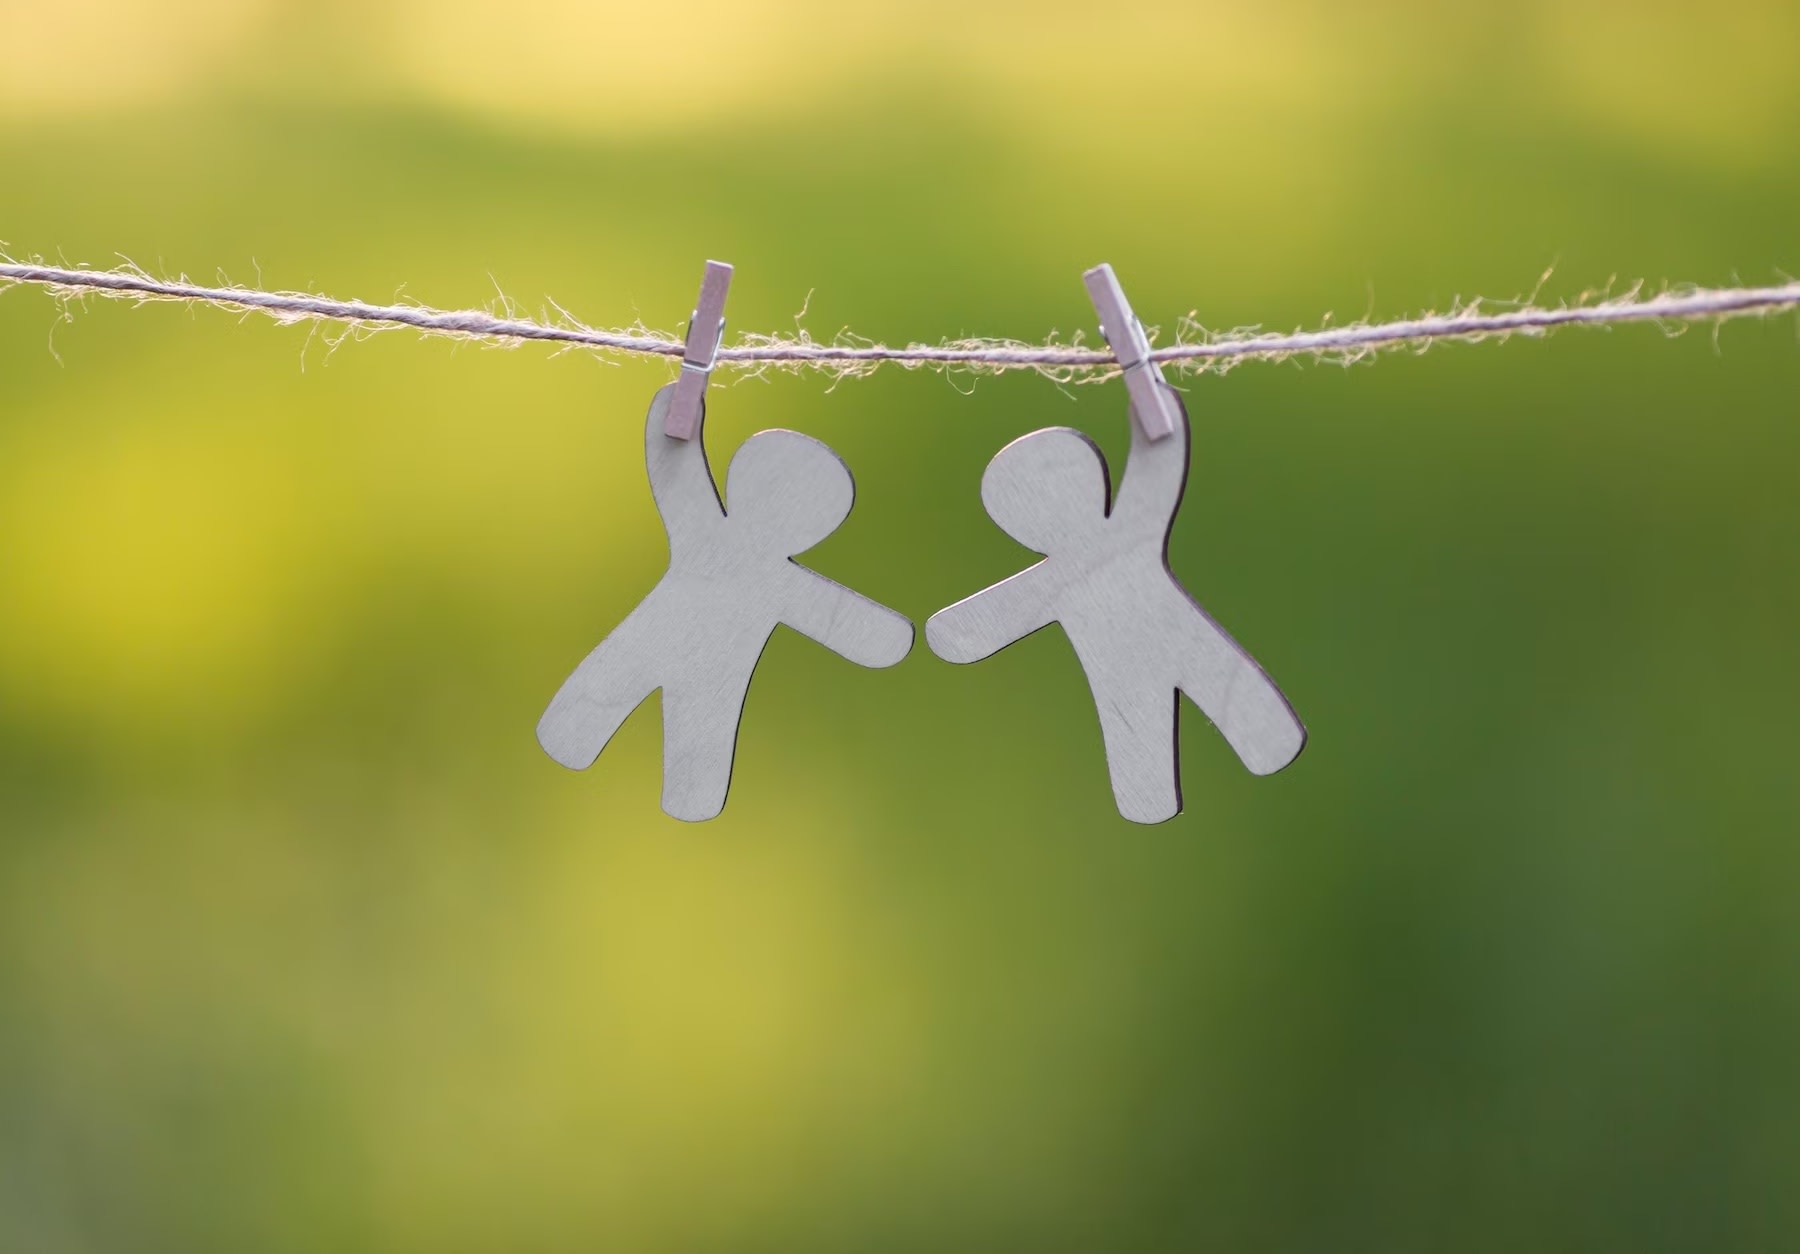 Image of two paper cutouts of human figures hanging on a string